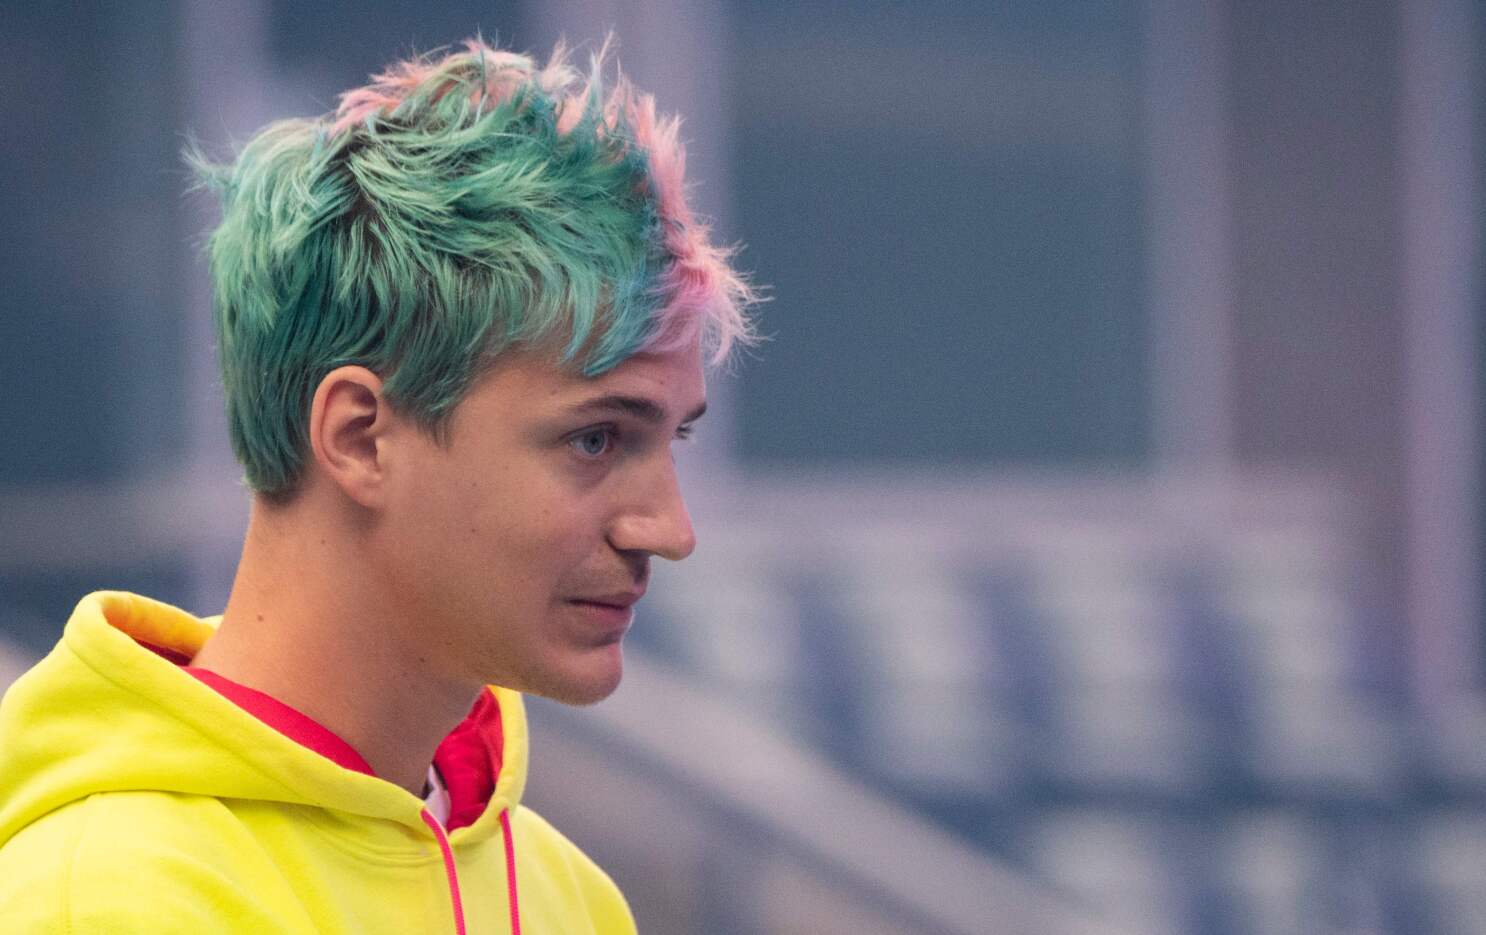 Ninja's Book 'Get Good': 6 Important Things I Learned From Reading It